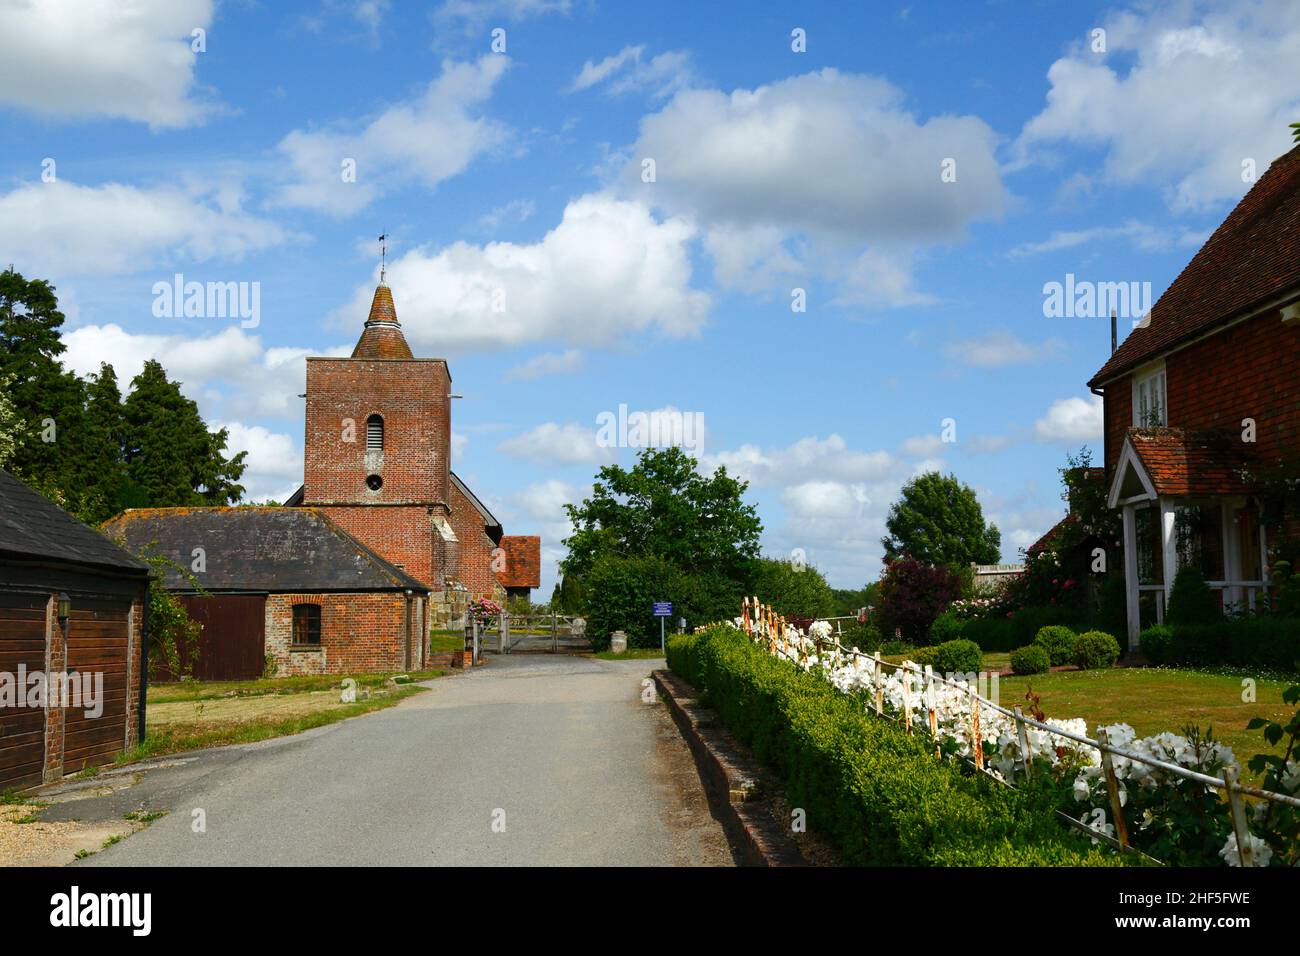 View of the picturesque and historic All Saints church in Tudeley village in early summer, Kent, England Stock Photo